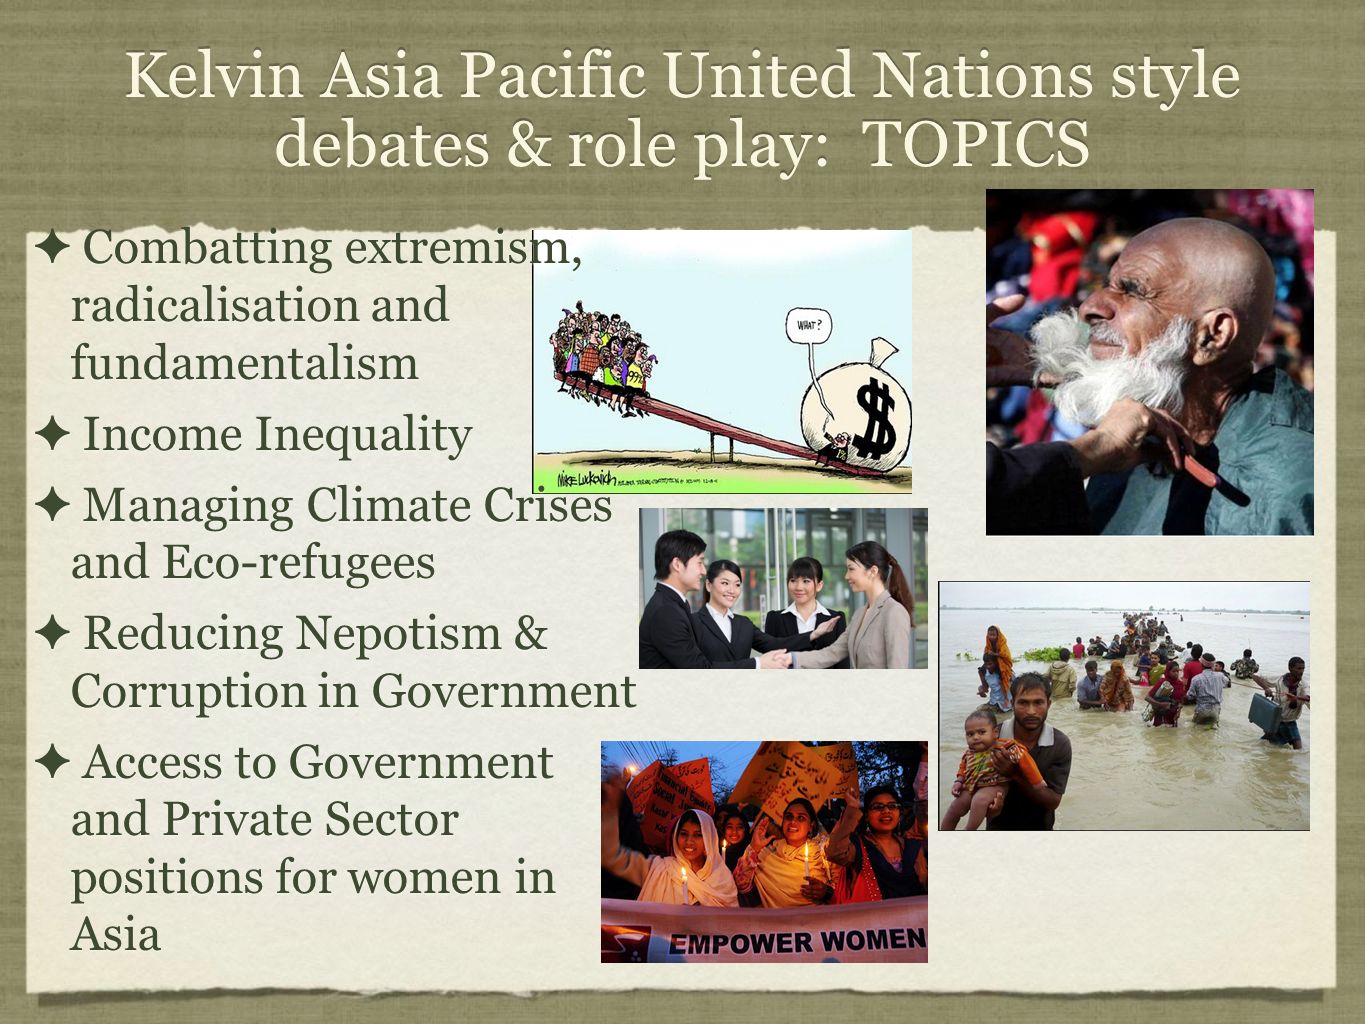 Kelvin Asia Pacific United Nations style debates & role play: TOPICS ✦ Combatting extremism, radicalisation and fundamentalism ✦ Income Inequality ✦ Managing Climate Crises and Eco-refugees ✦ Reducing Nepotism & Corruption in Government ✦ Access to Government and Private Sector positions for women in Asia ✦ Combatting extremism, radicalisation and fundamentalism ✦ Income Inequality ✦ Managing Climate Crises and Eco-refugees ✦ Reducing Nepotism & Corruption in Government ✦ Access to Government and Private Sector positions for women in Asia